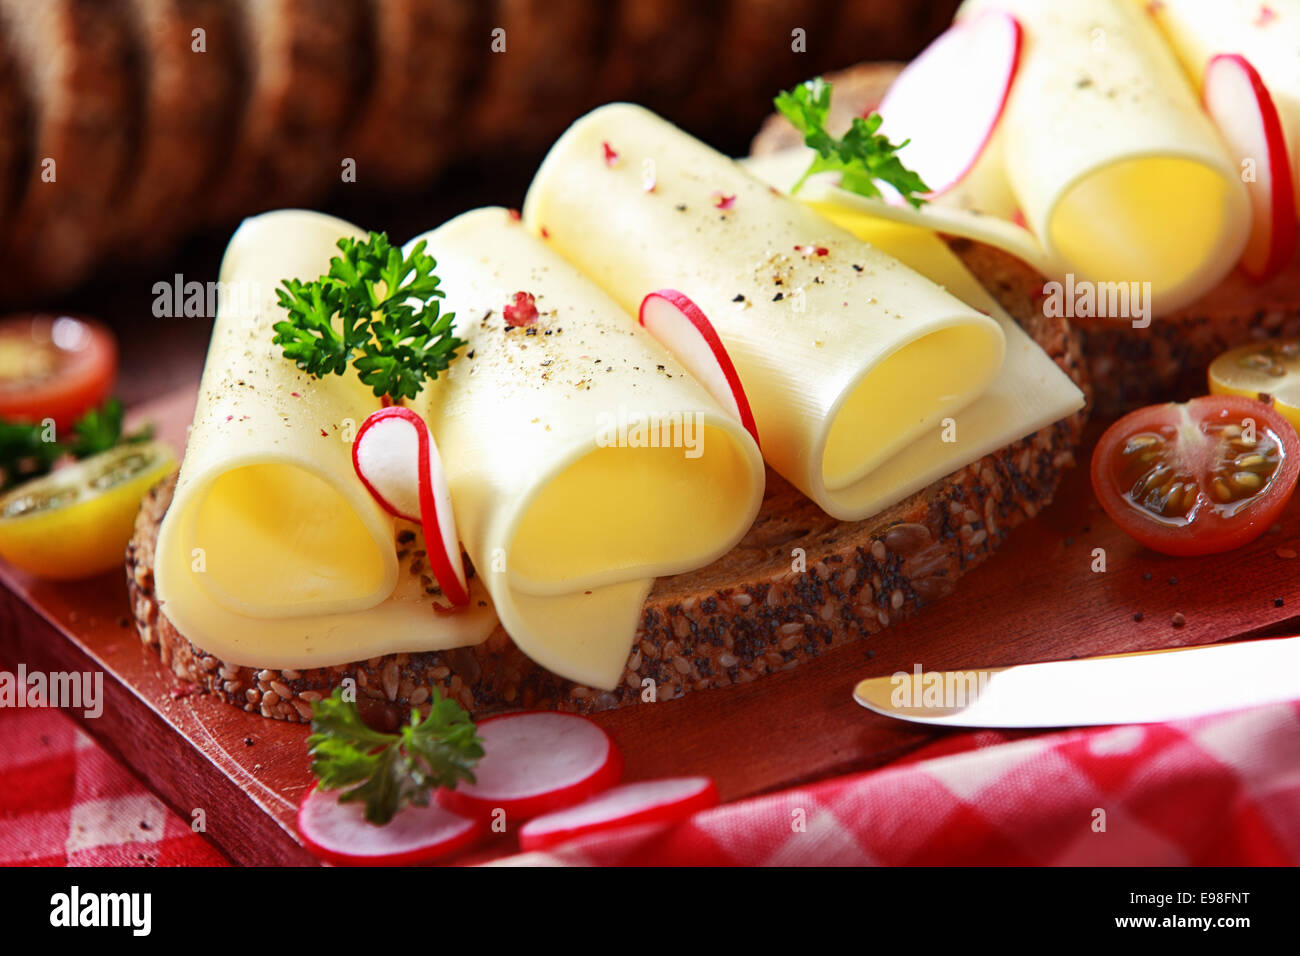 Tasty gouda cheese sandwich on wholegrain bread topped with slice radish and parsely for a healthy country lunch, close up view Stock Photo